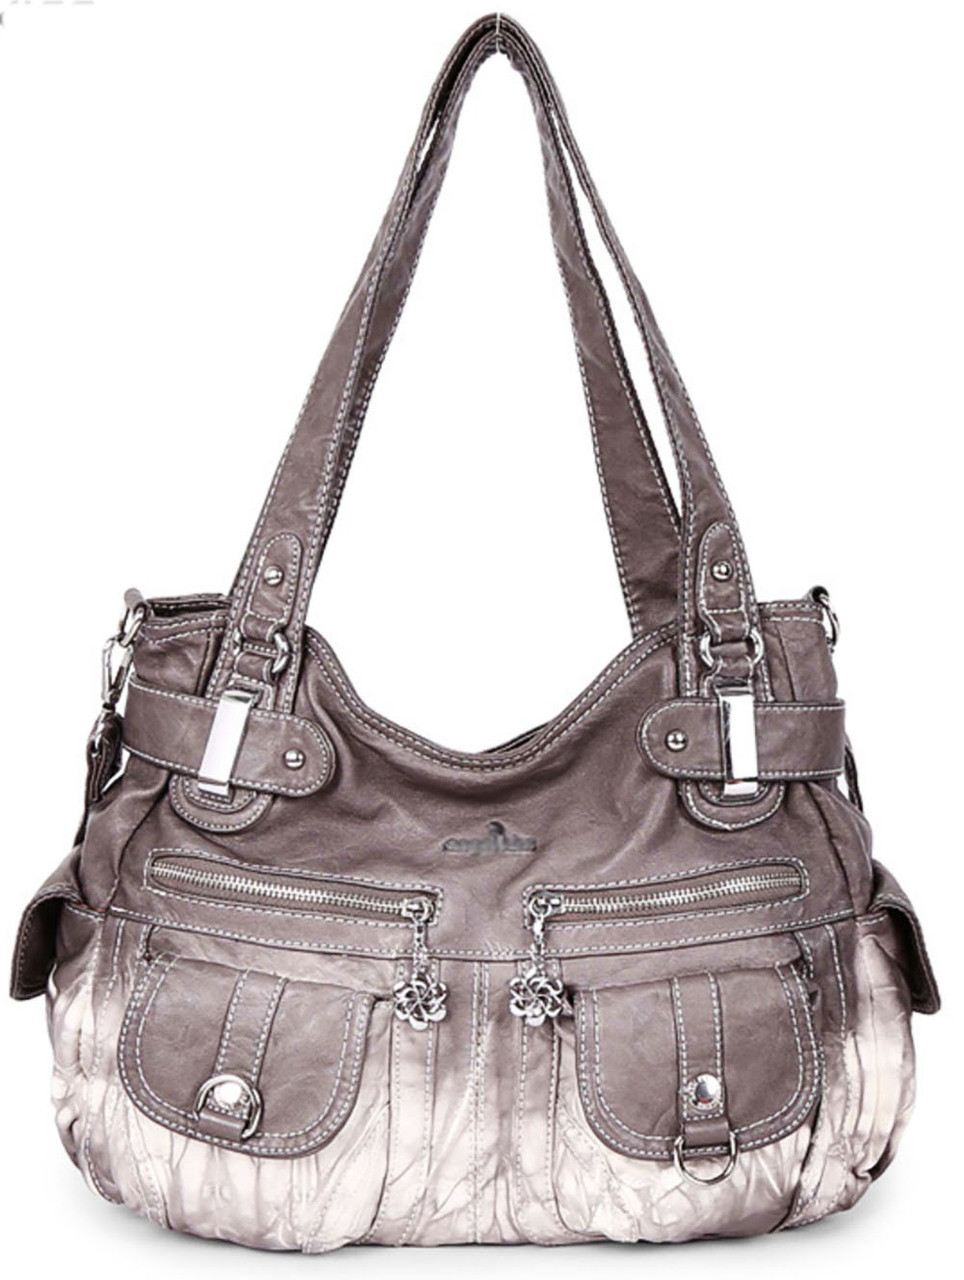 Soft leather handbags with multiple pockets